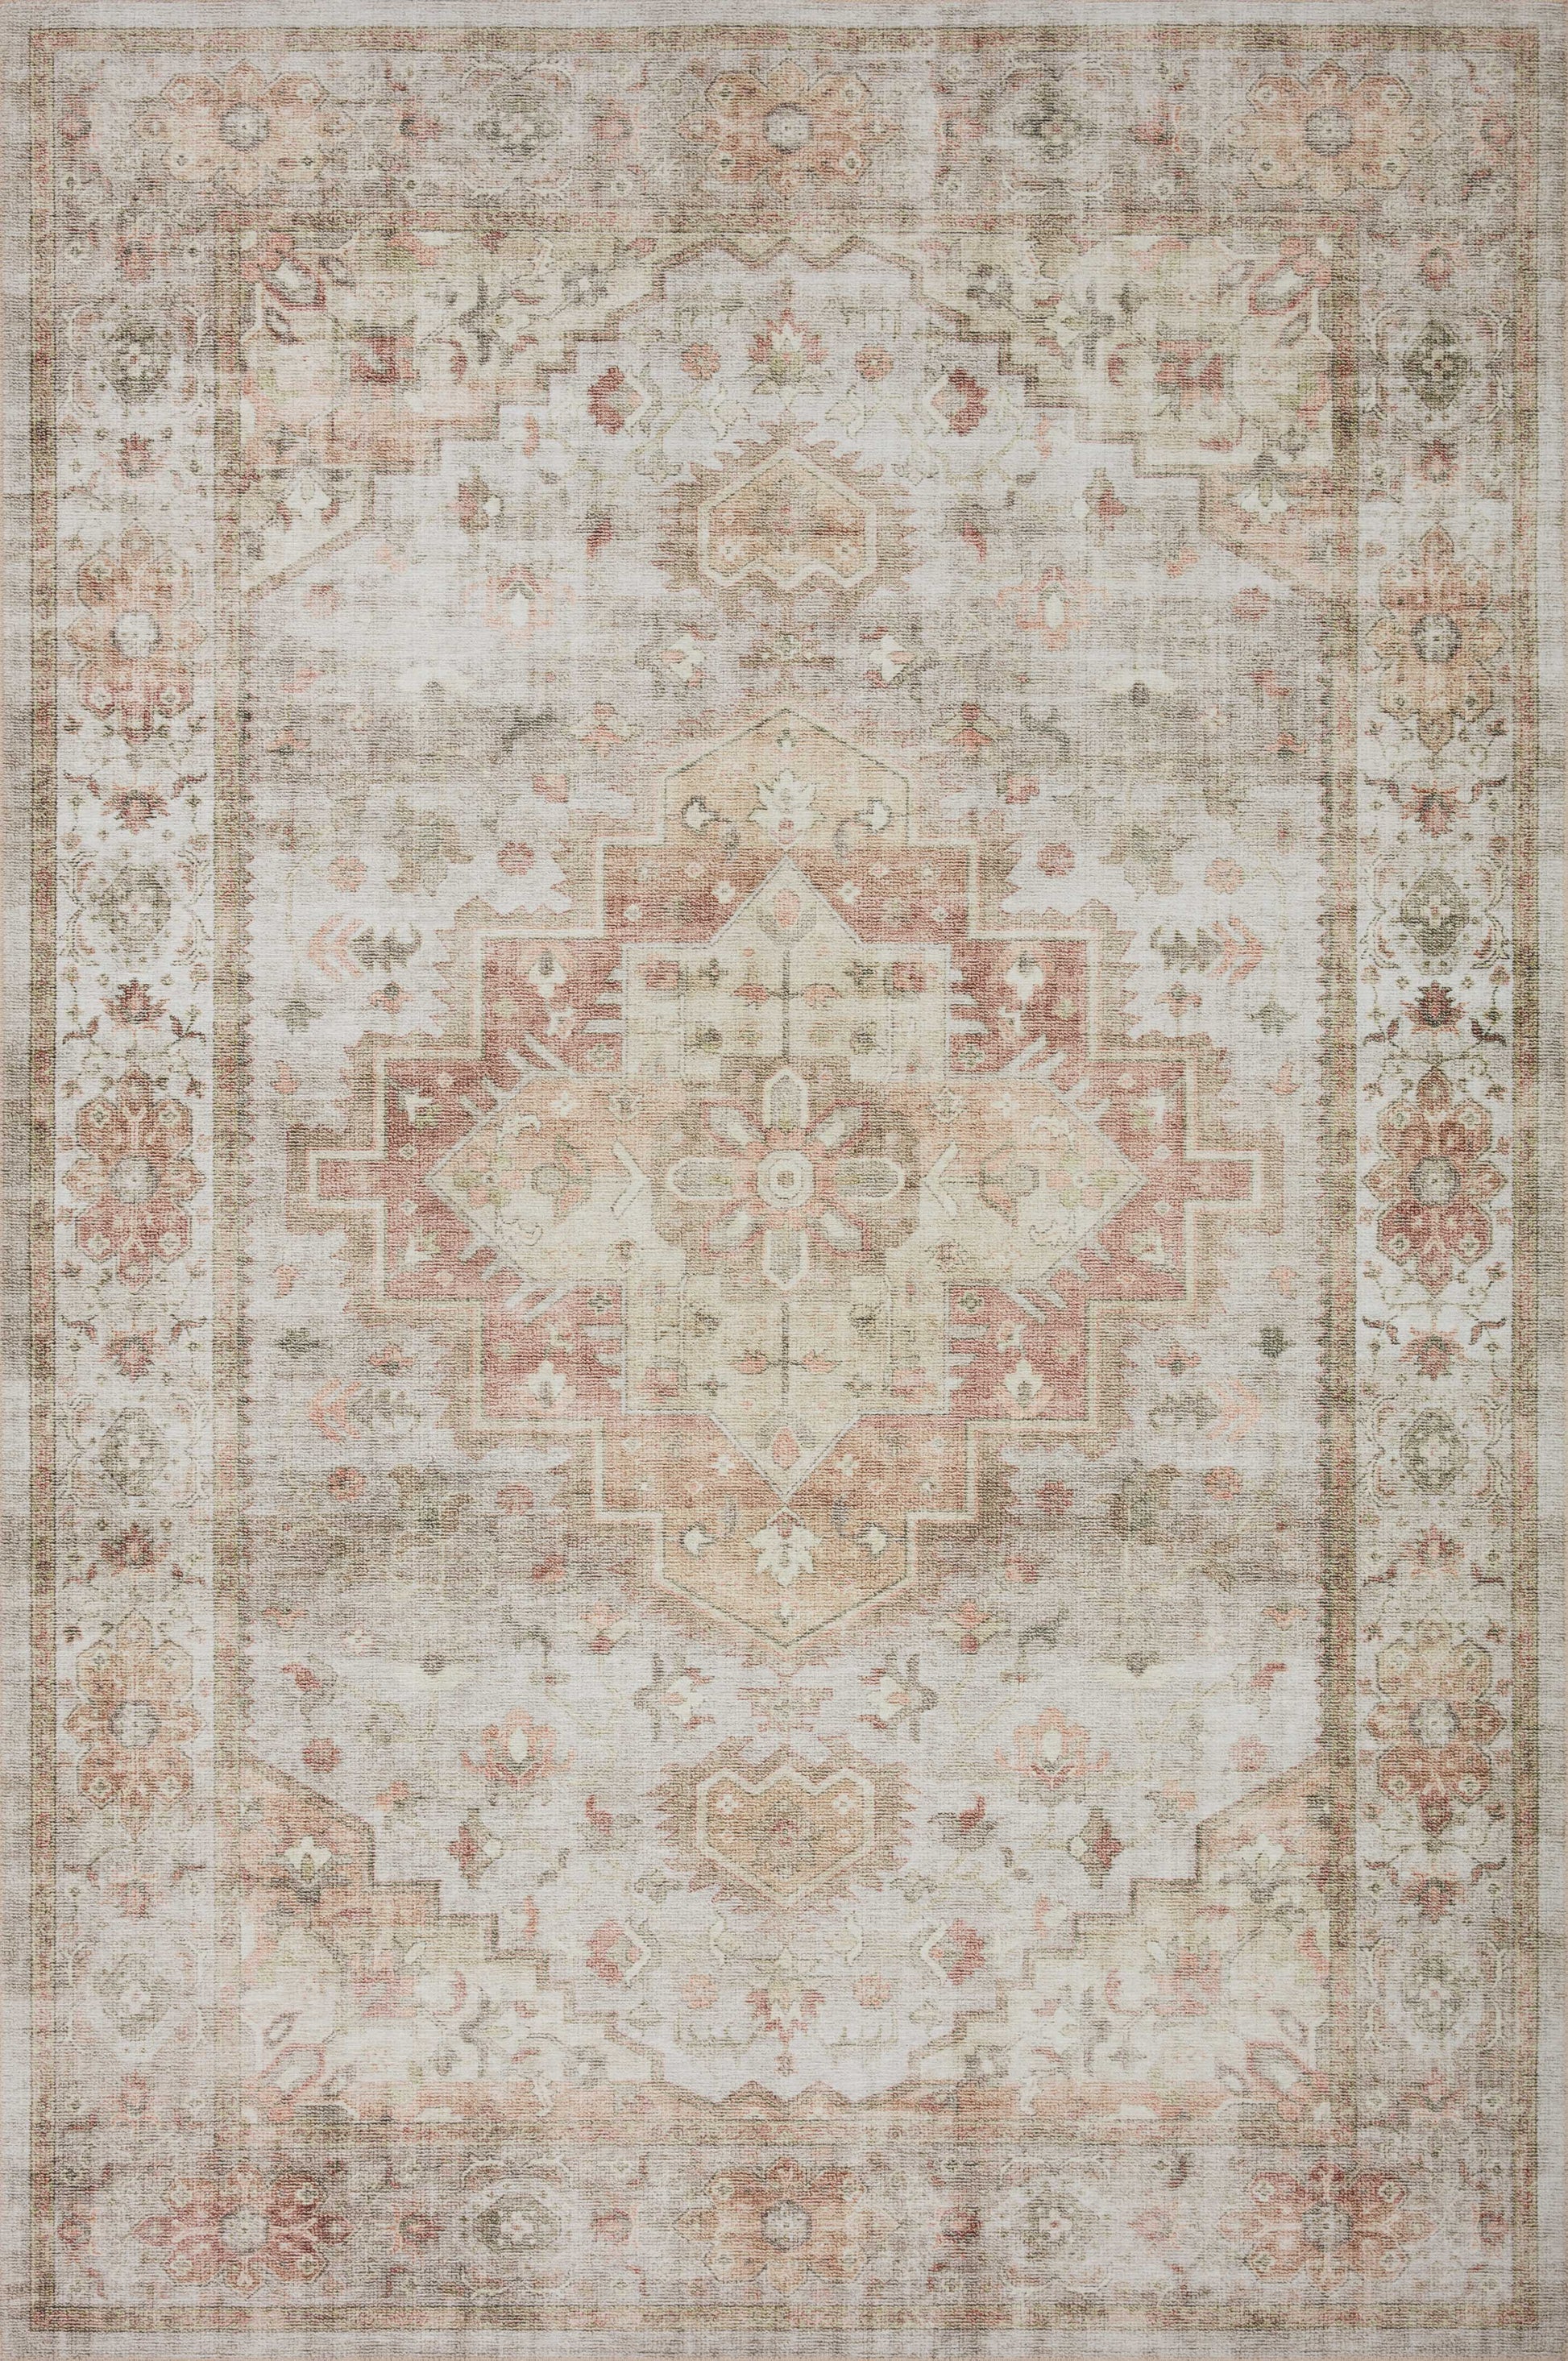 A picture of Loloi's Heidi rug, in style HEI-02, color Sage / Multi